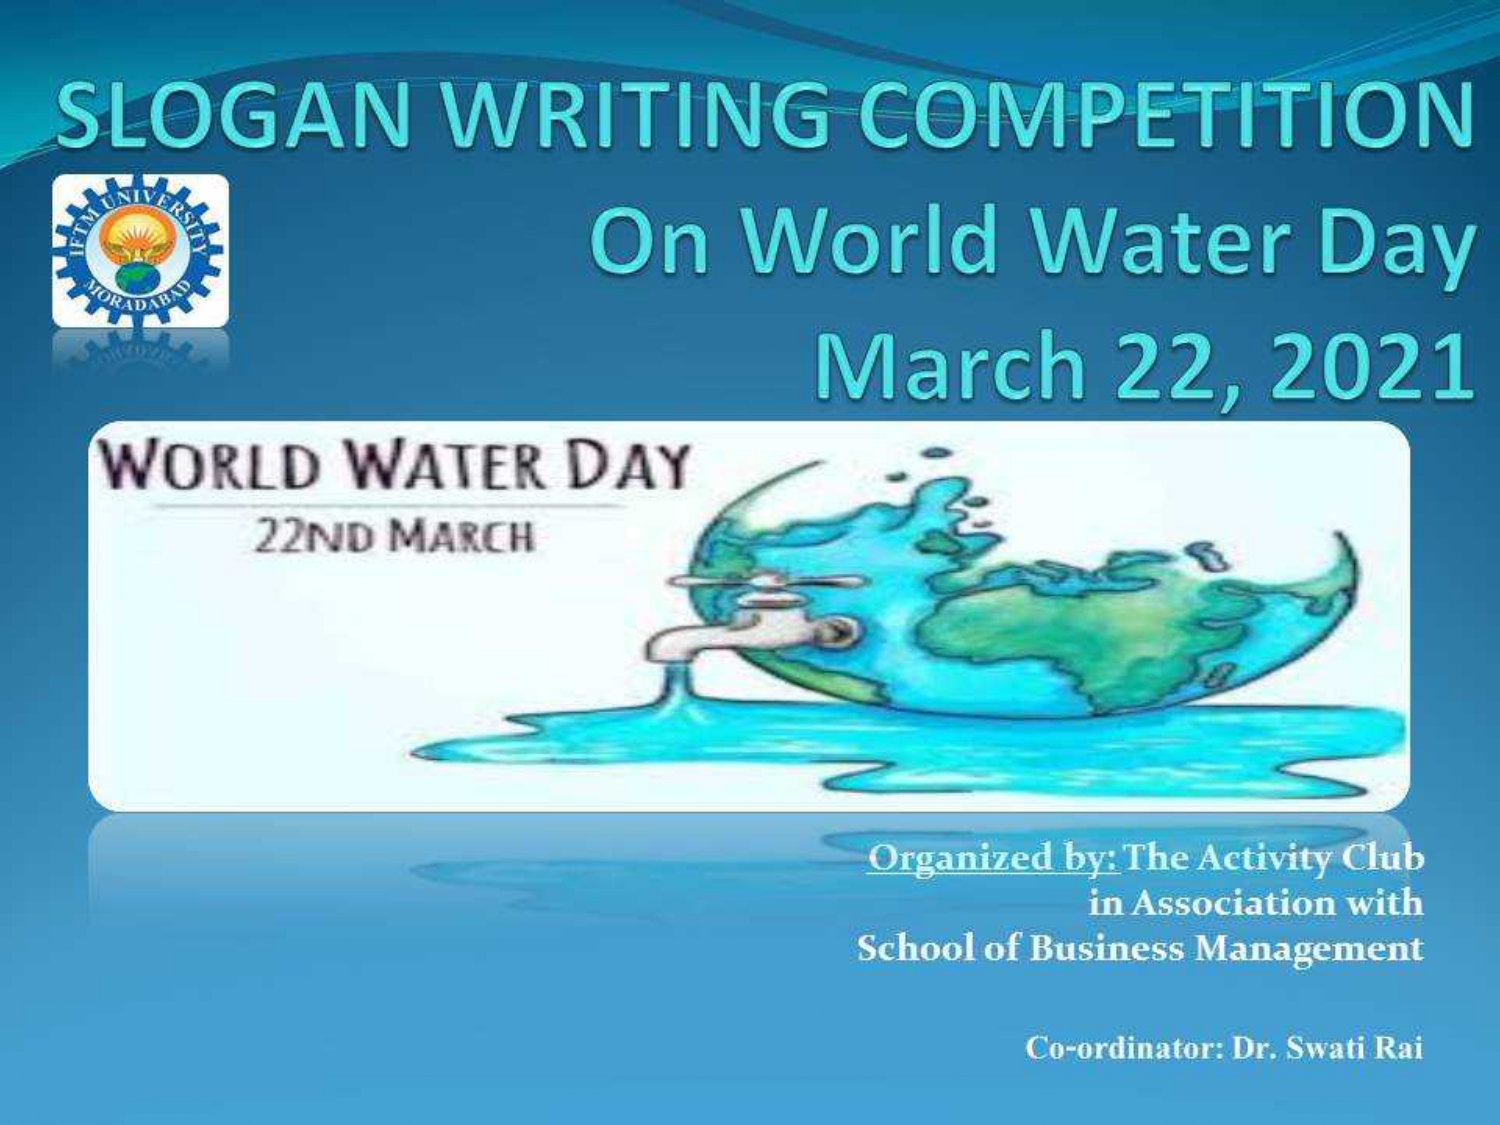 Slogan Writing Competition on World Water Day